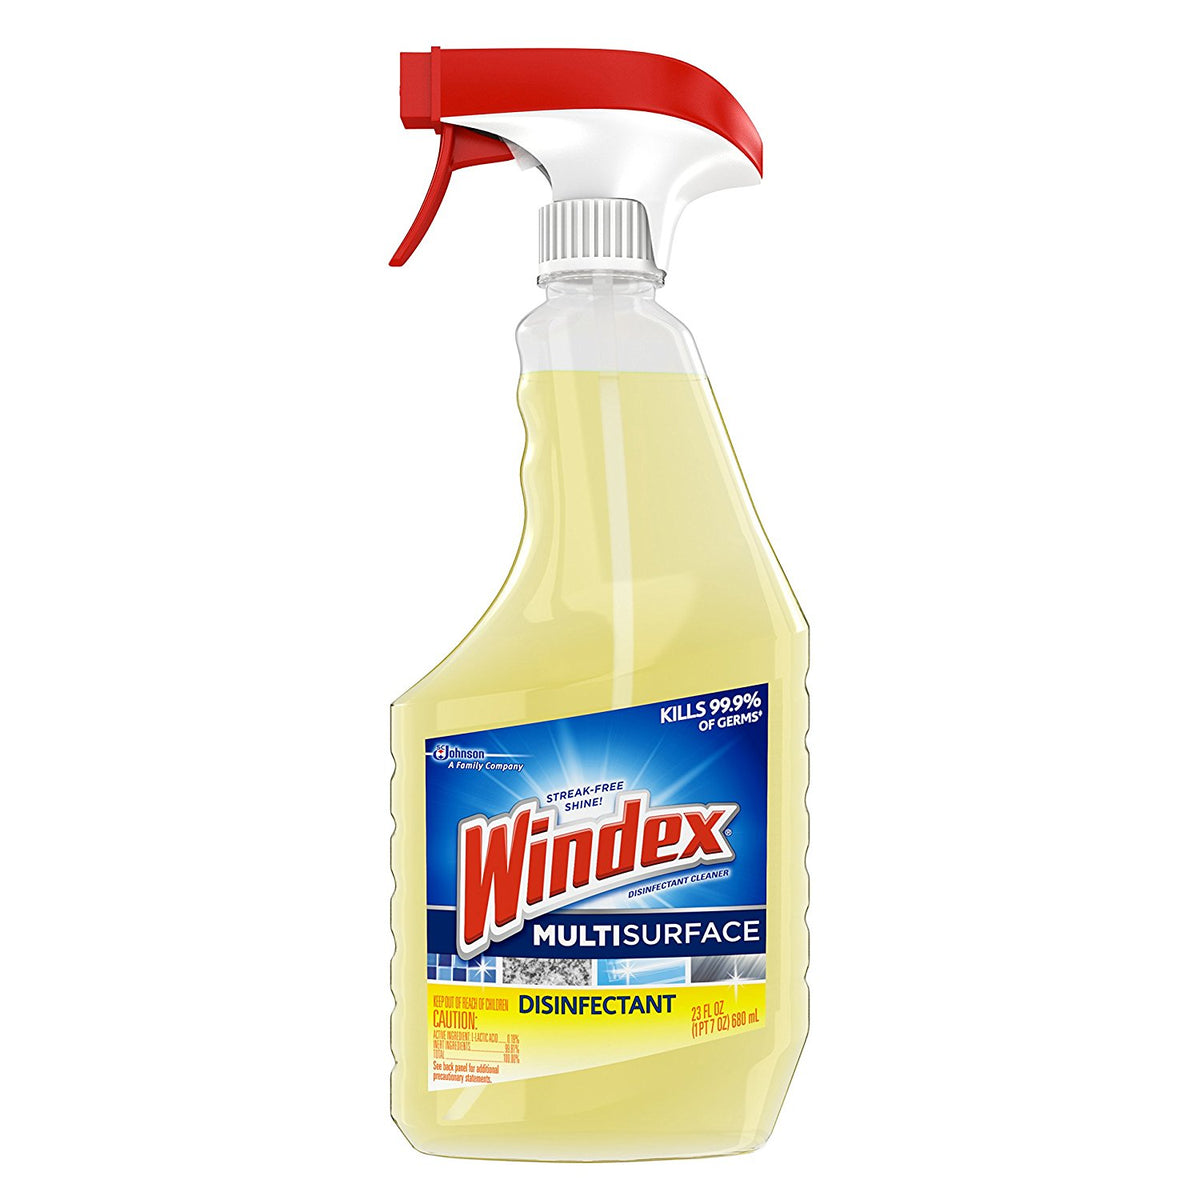 Windex 70251 Multi Surface Disinfectant Cleaner Spray, 23 Oz